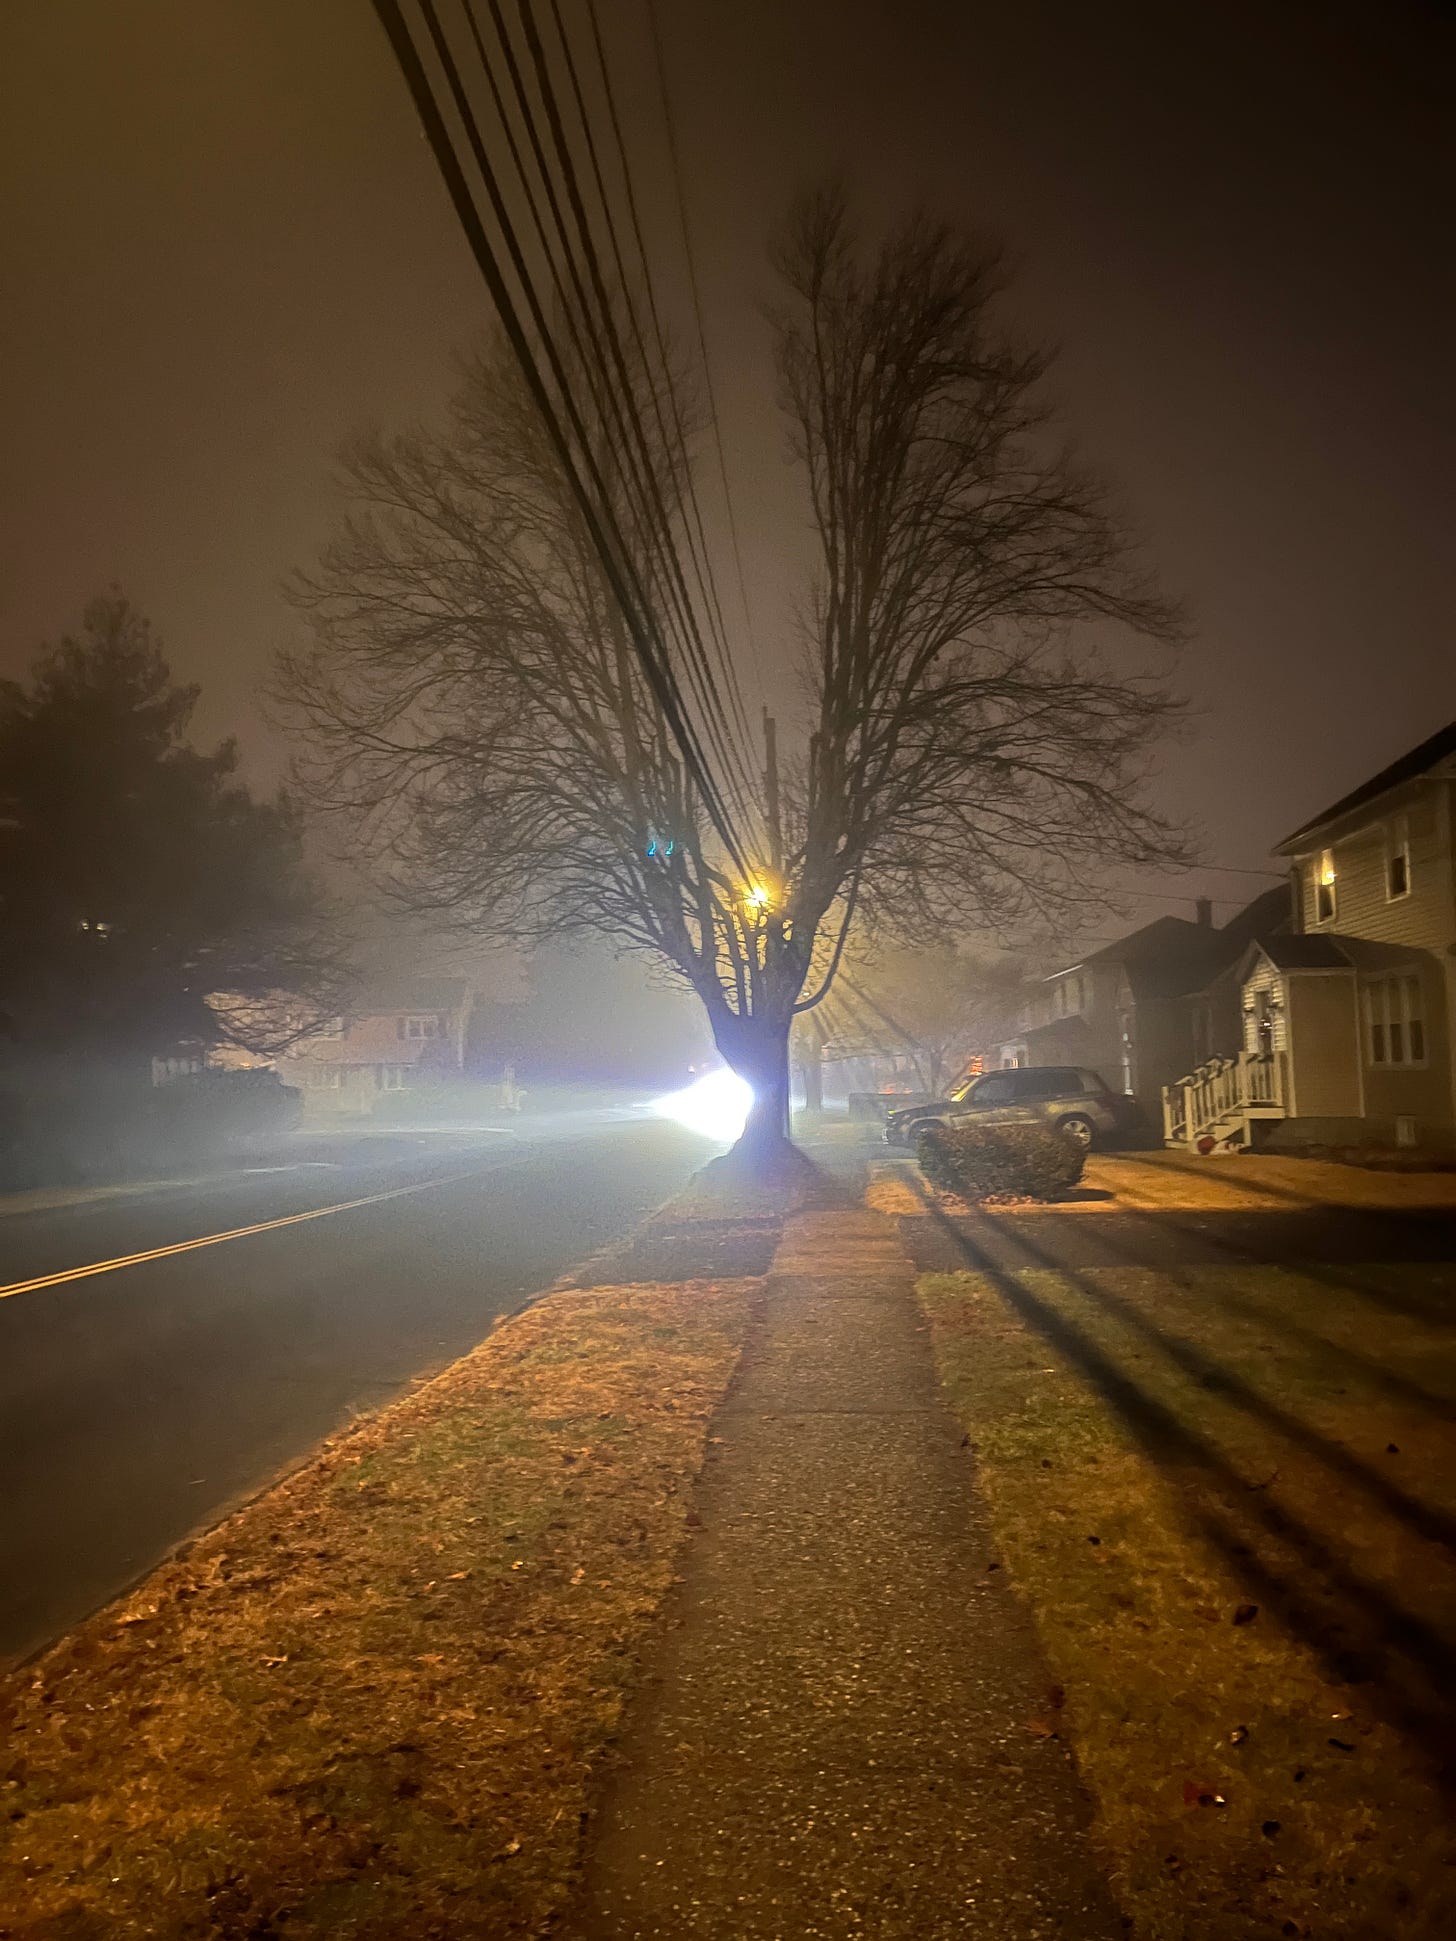 Darkness, a tree's branches in winter divided by powerlines, with a light from a house at the base of the split and a flash of bright light near the trunk from an oncoming car.